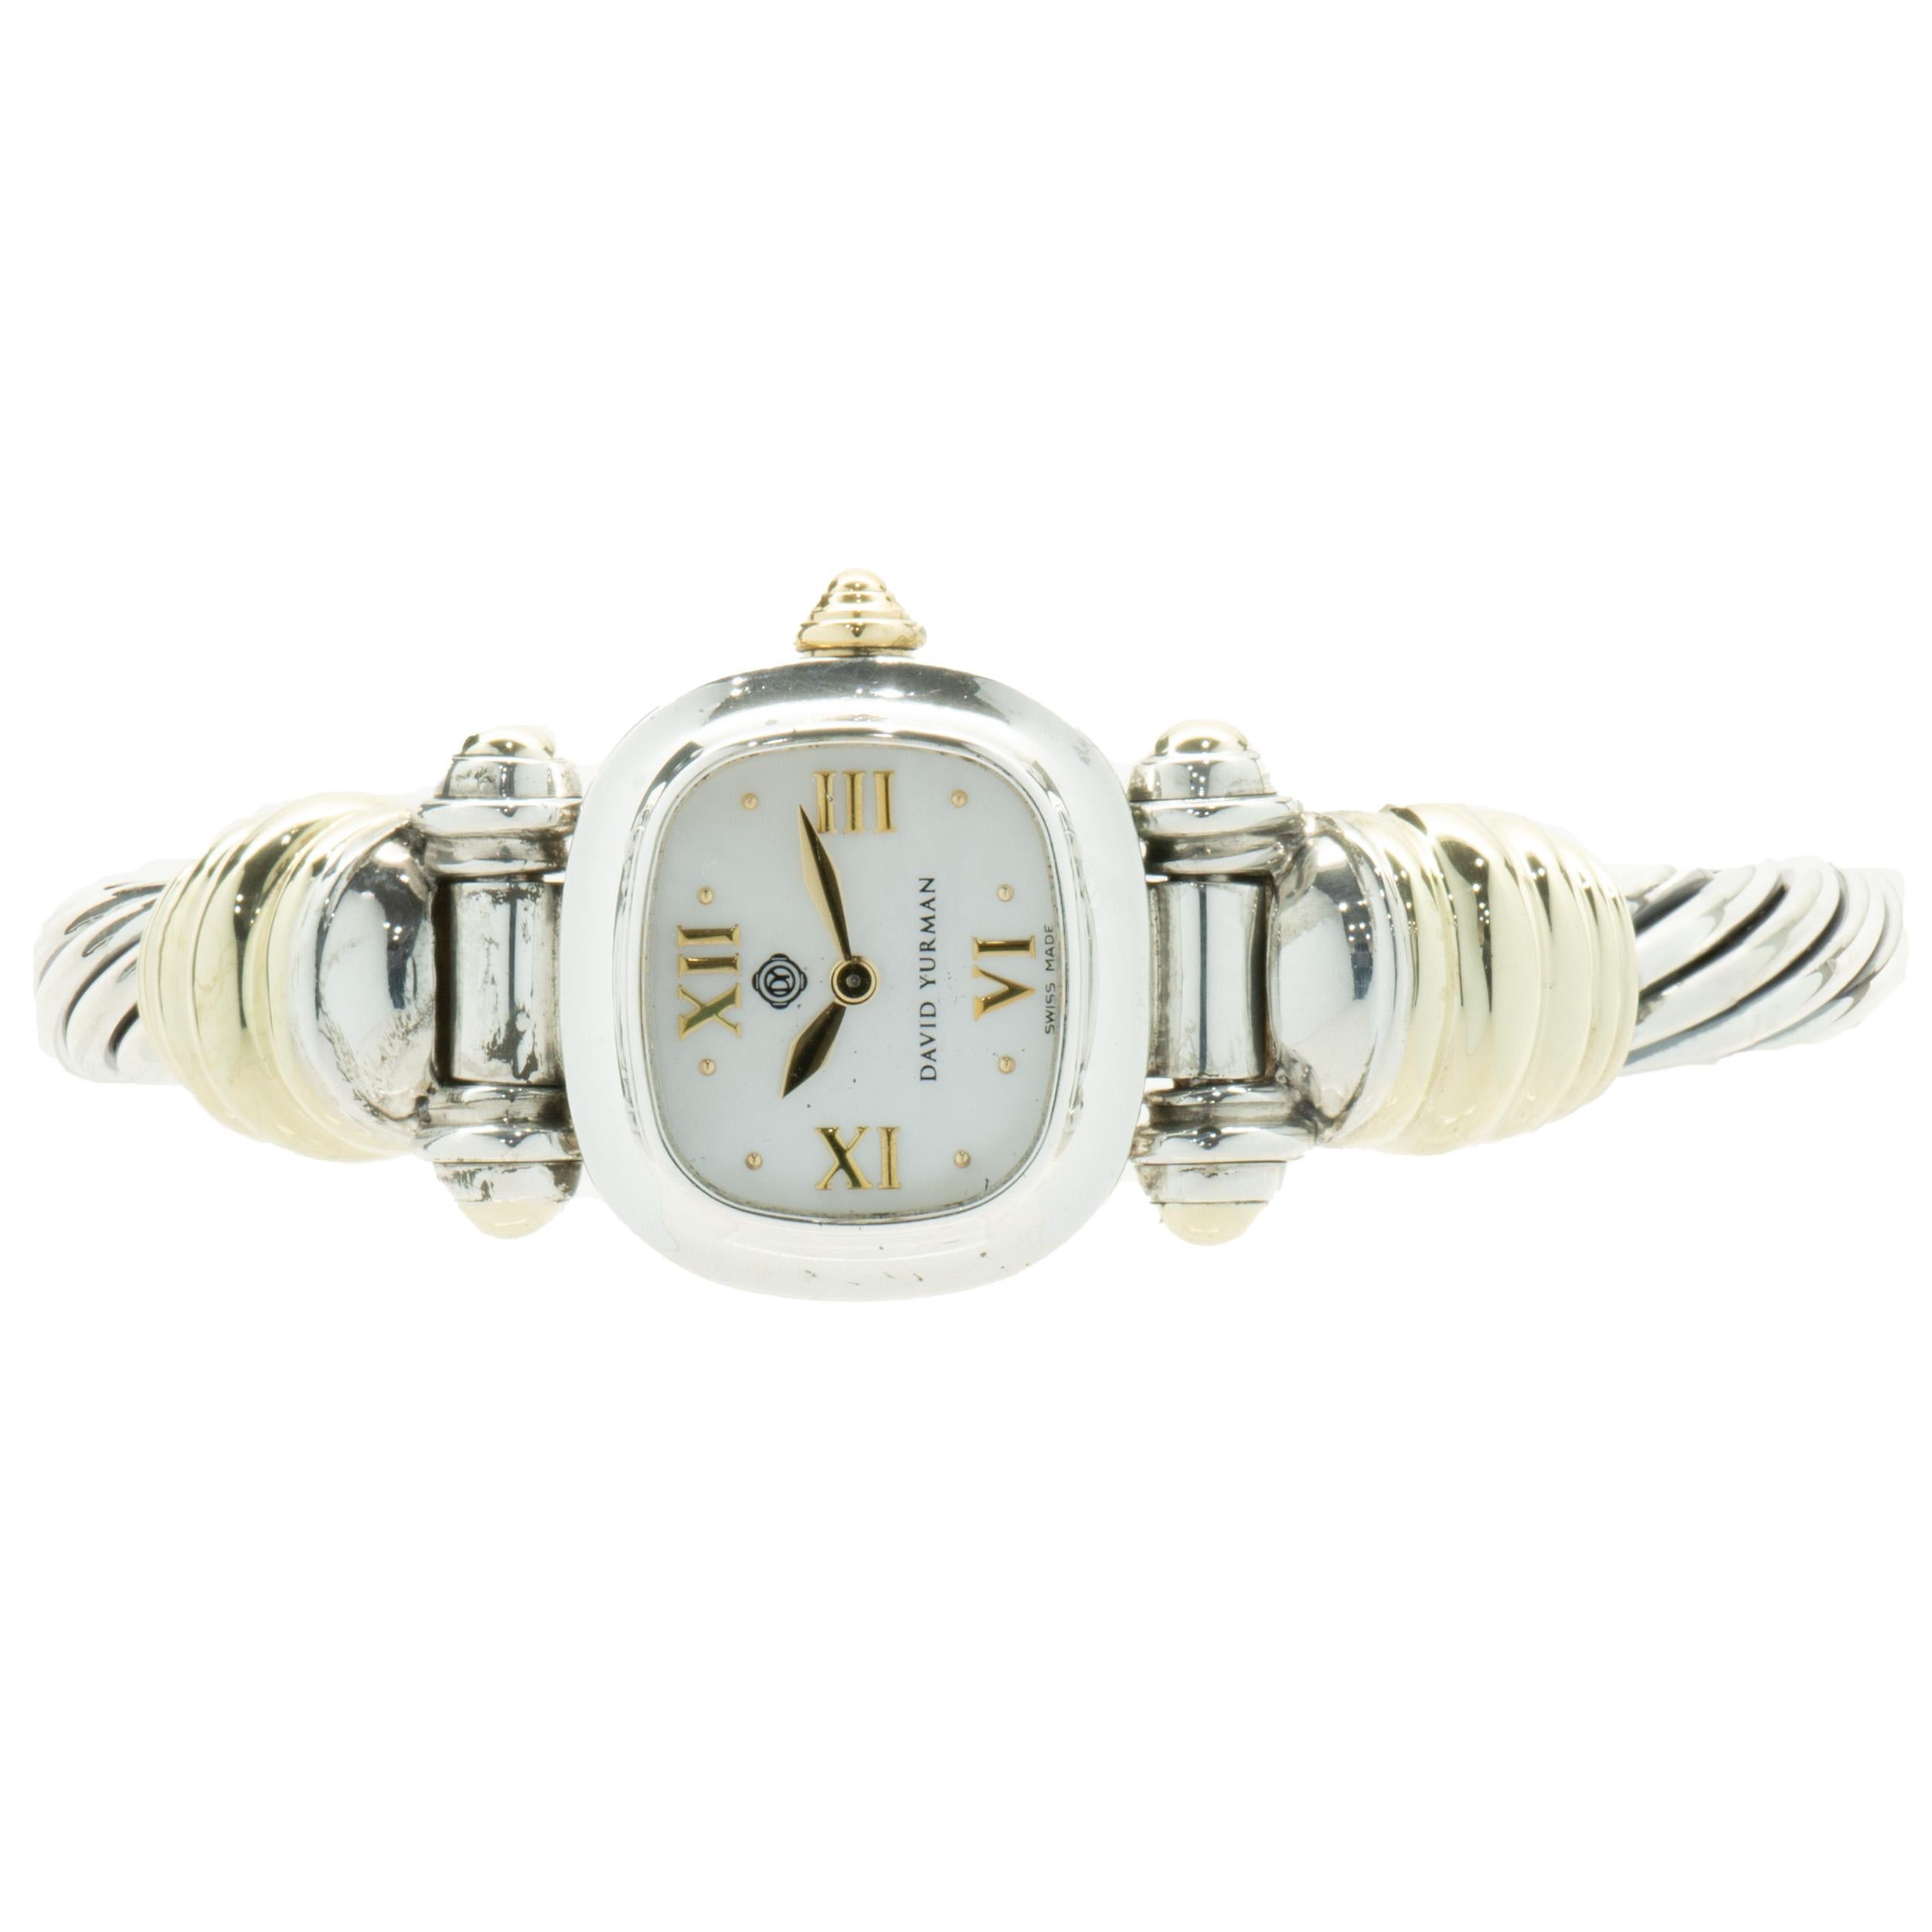 Designer: David Yurman
Material: sterling silver / 14K yellow gold bezel
Dial: Mother of Pearl
Serial # T-20XXX
Dimensions: watch top measures 21 x 19mm

No box or papers included